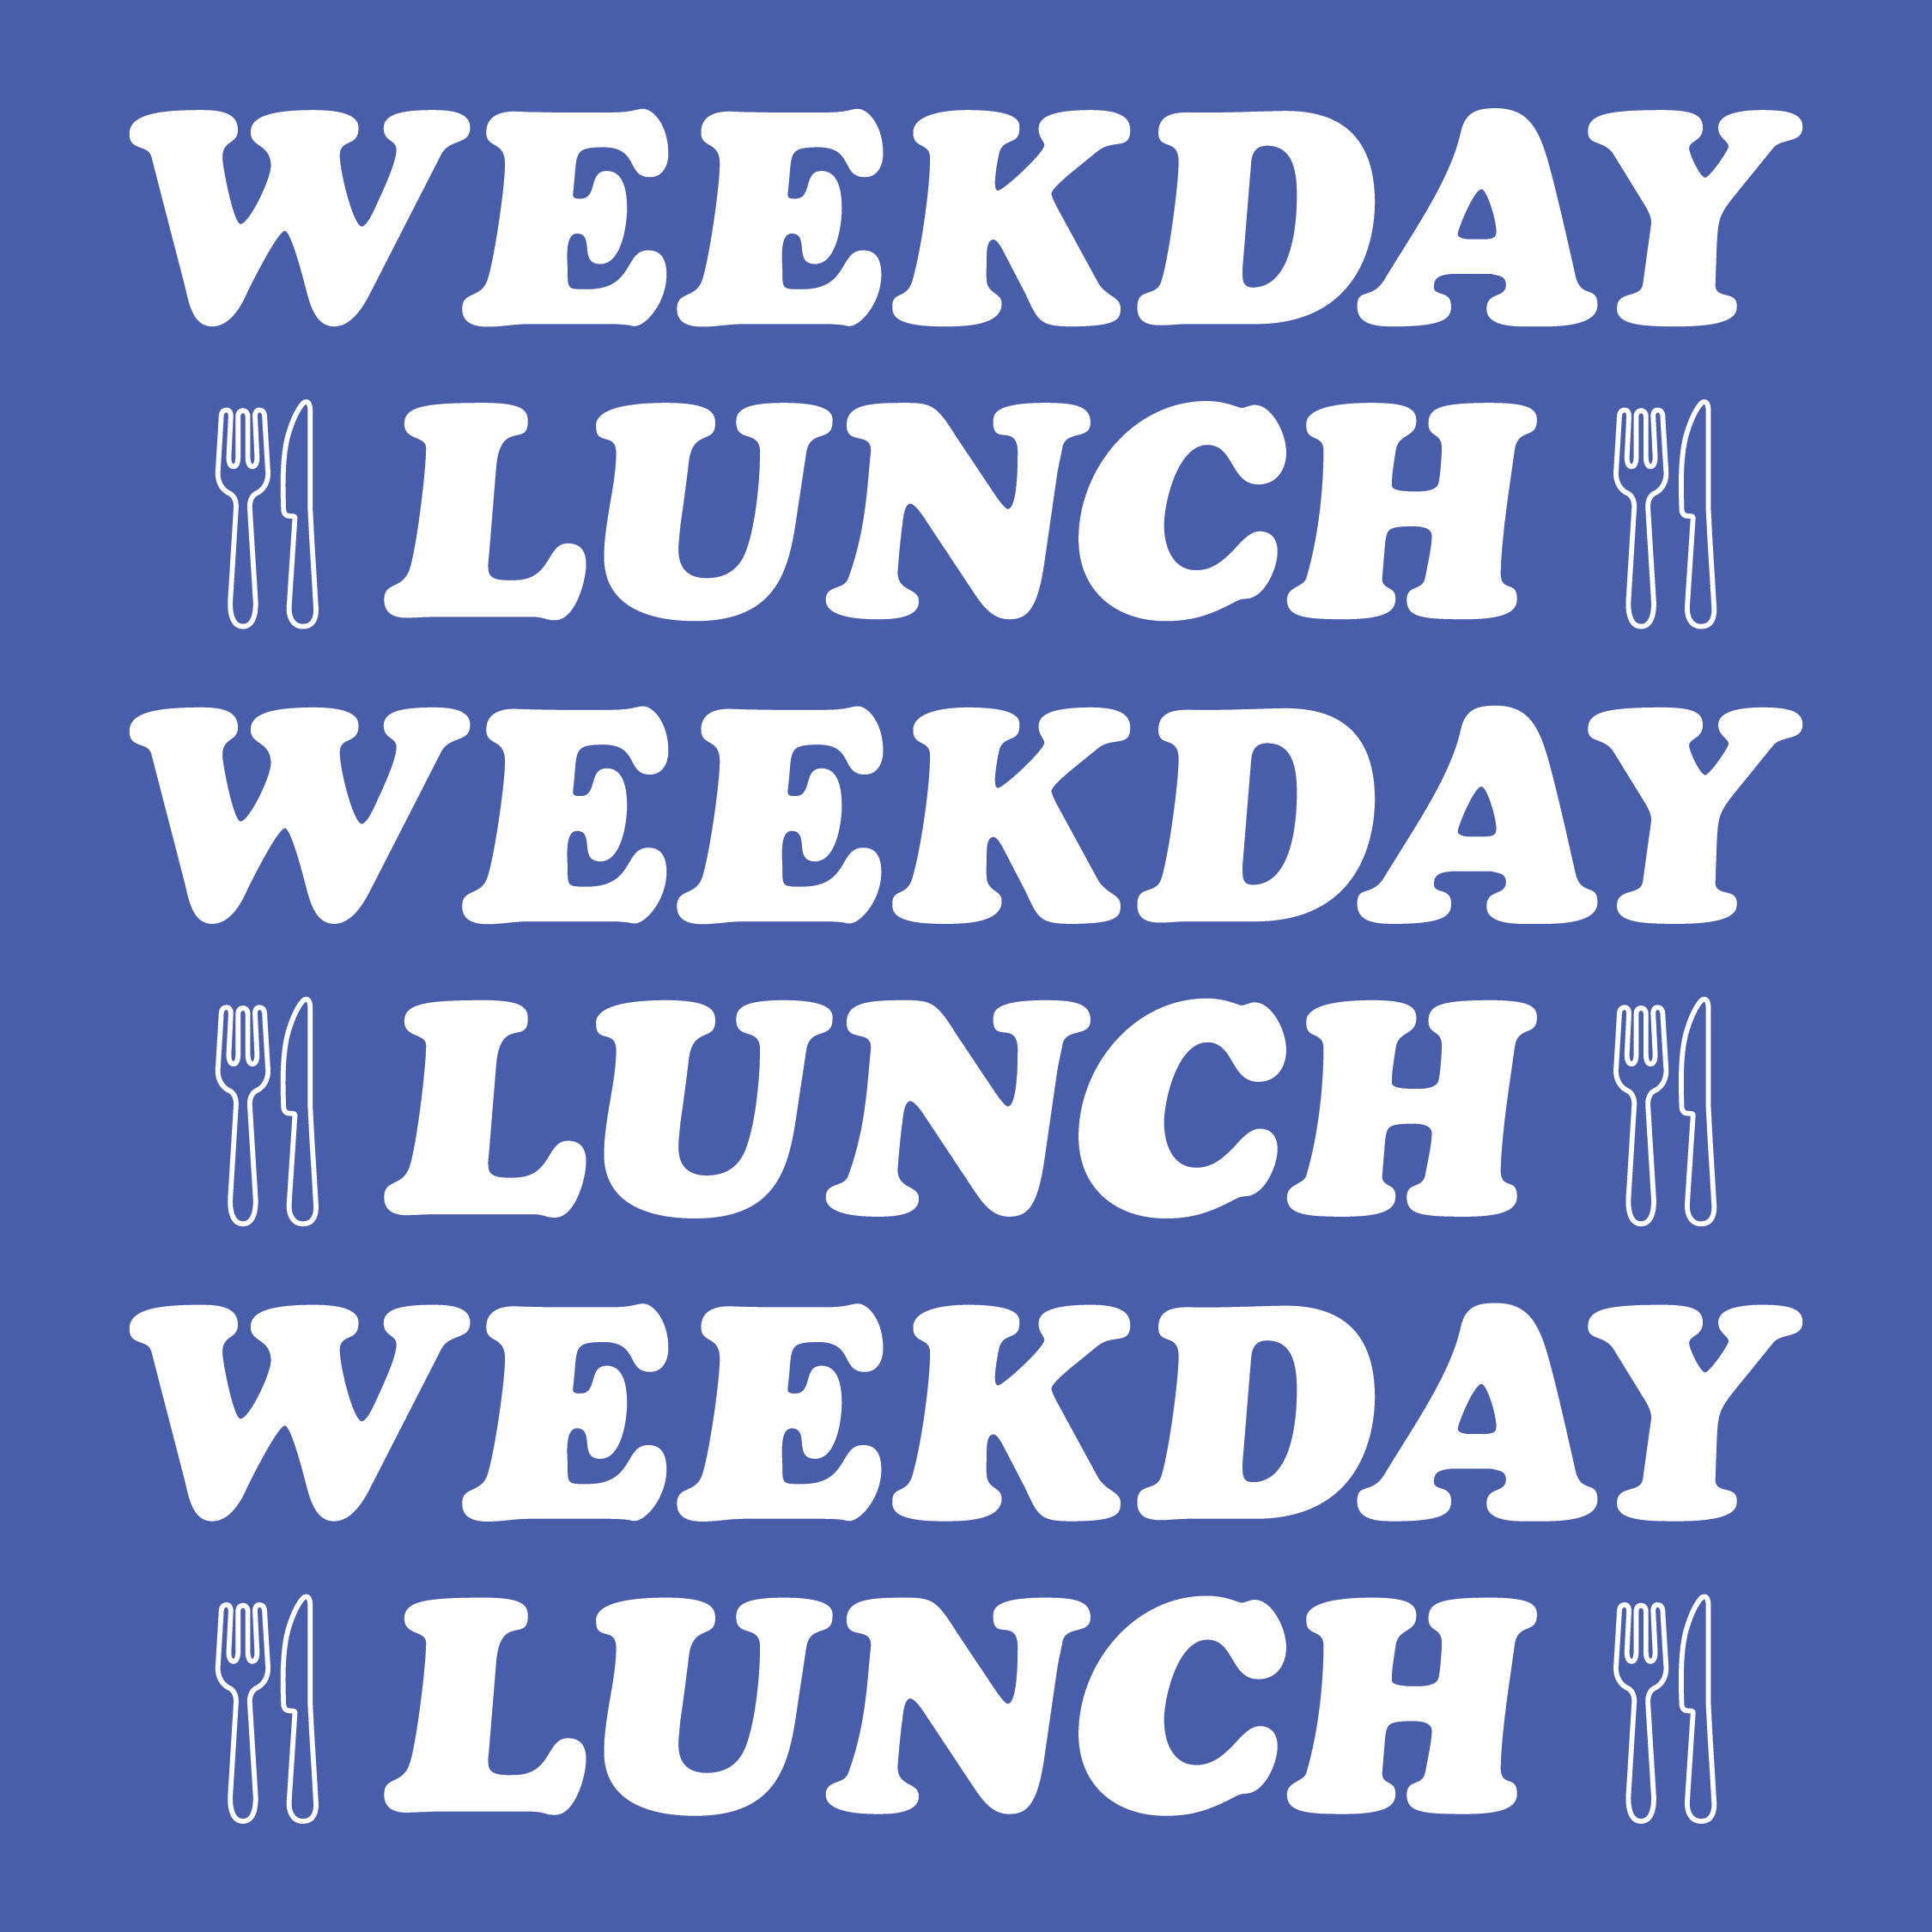 The $20 Weekday Lunch